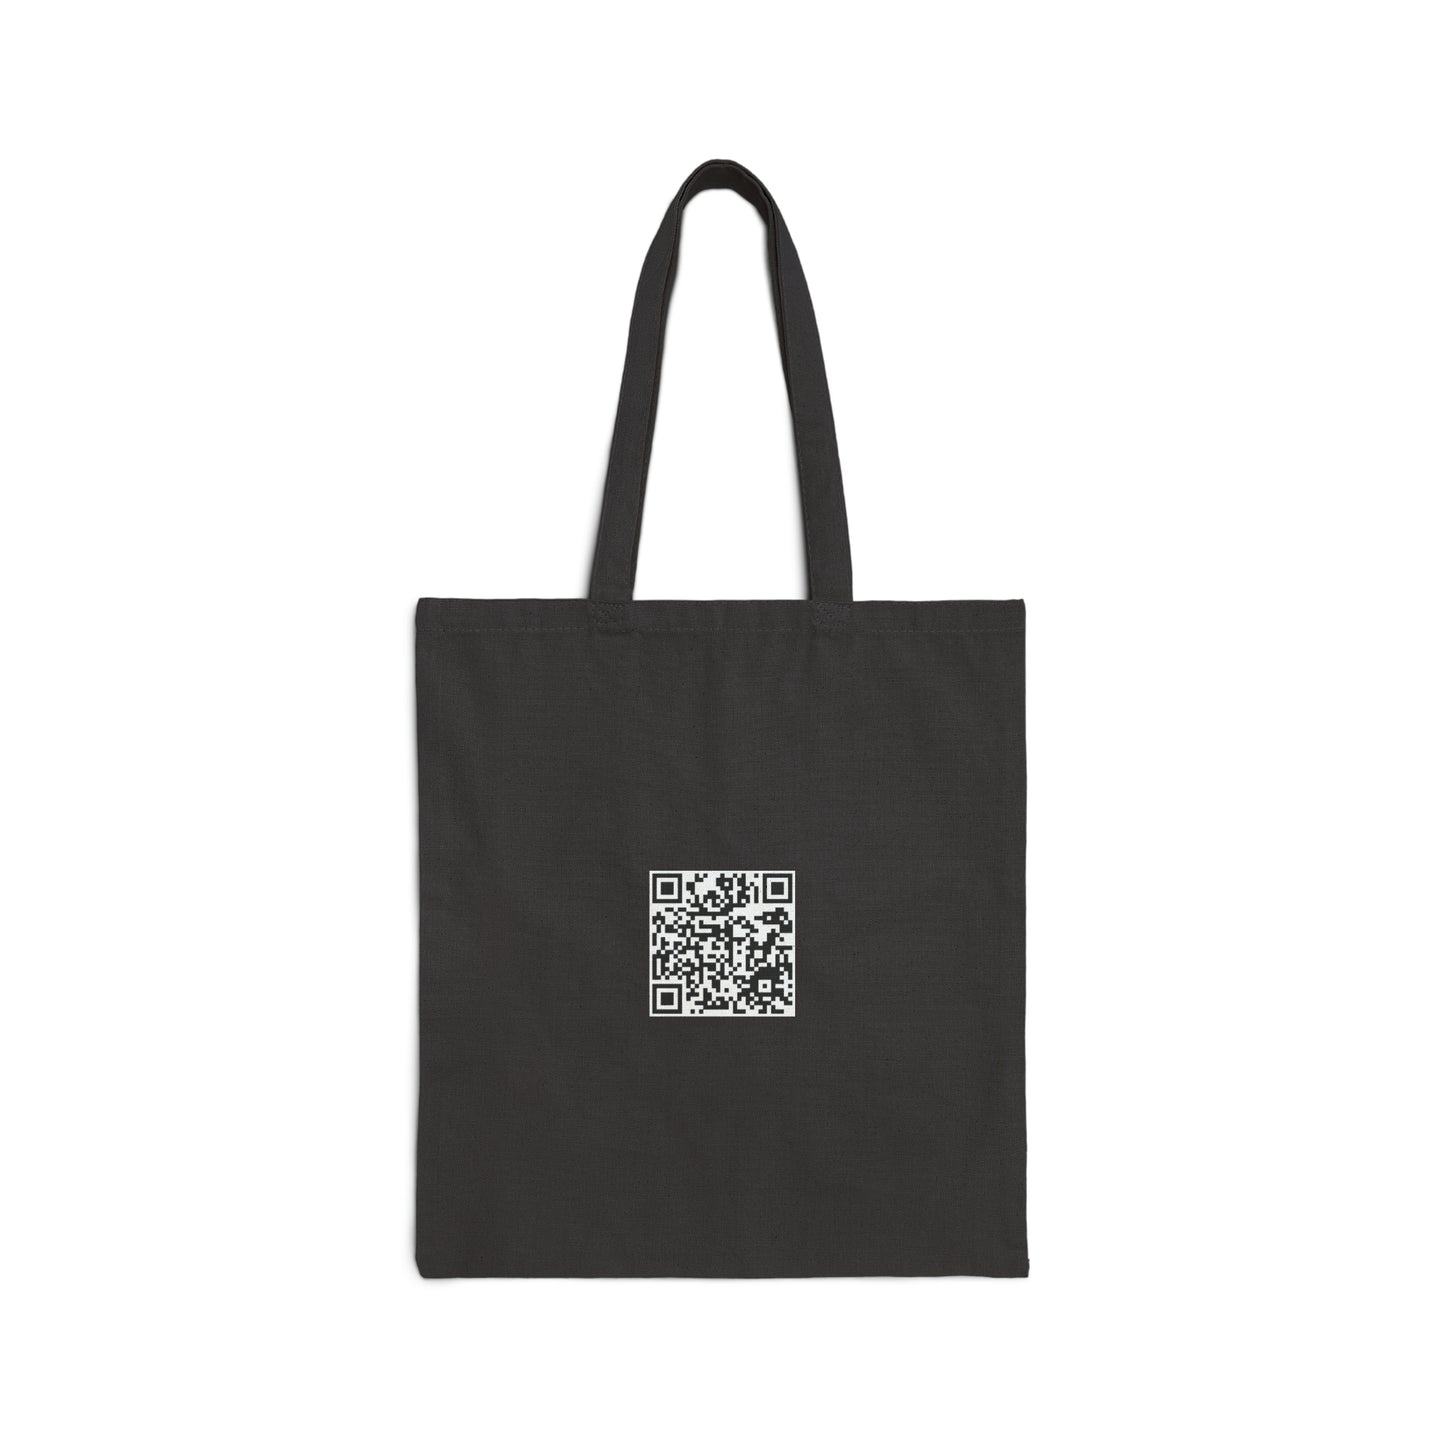 The Door To Forever - Cotton Canvas Tote Bag